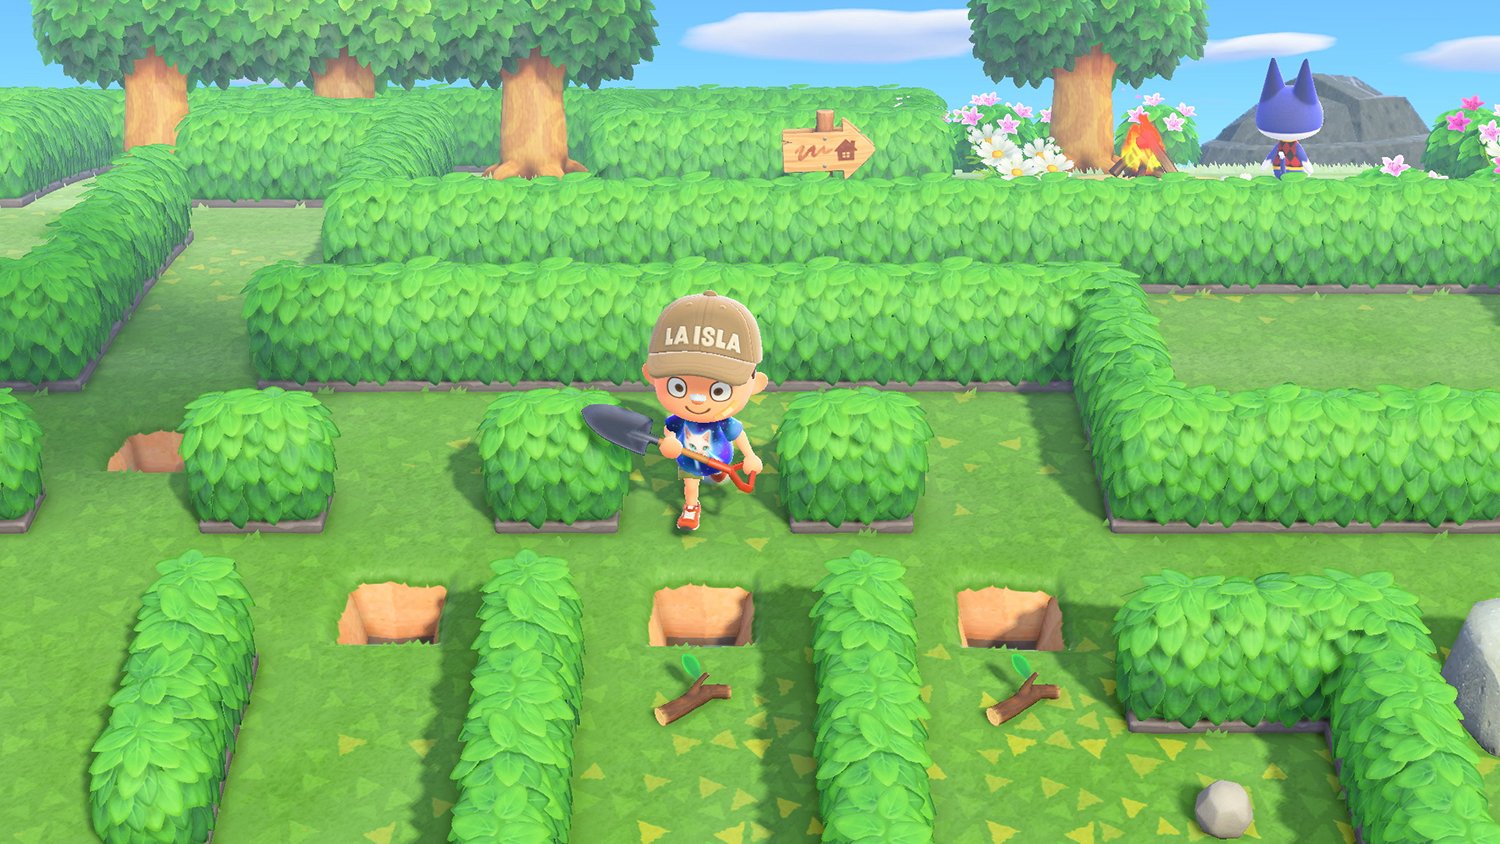 2022 May Day event in Animal Crossing: New Horizons